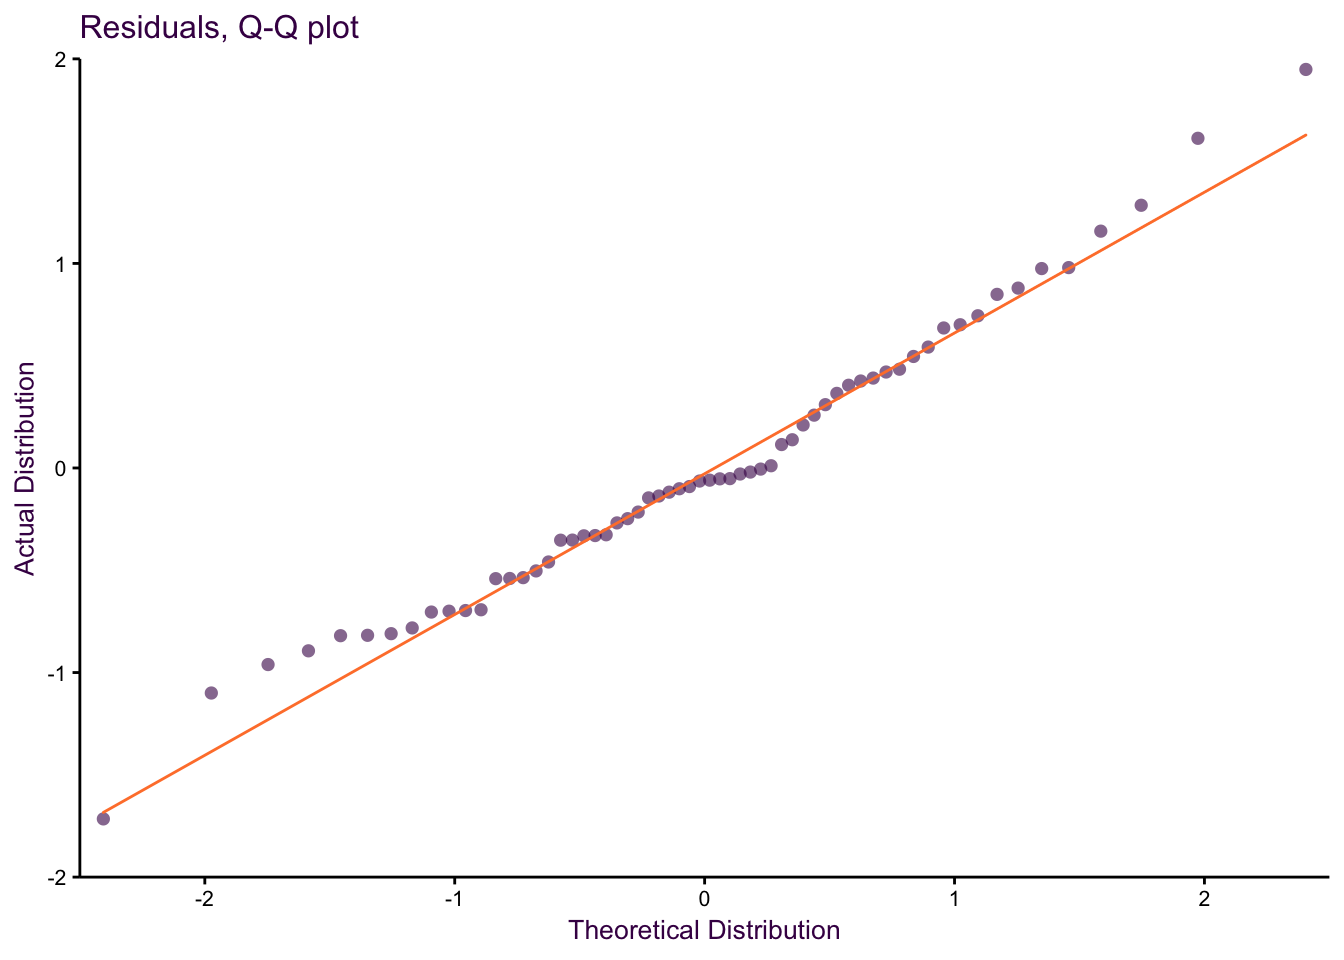 _Left:_ A scatter plot of the log-transformed data. _Right:_ Q-Q normal plot for the residuals of the linear model fitted to the log transformed data. The model fits the log-transformed data well.